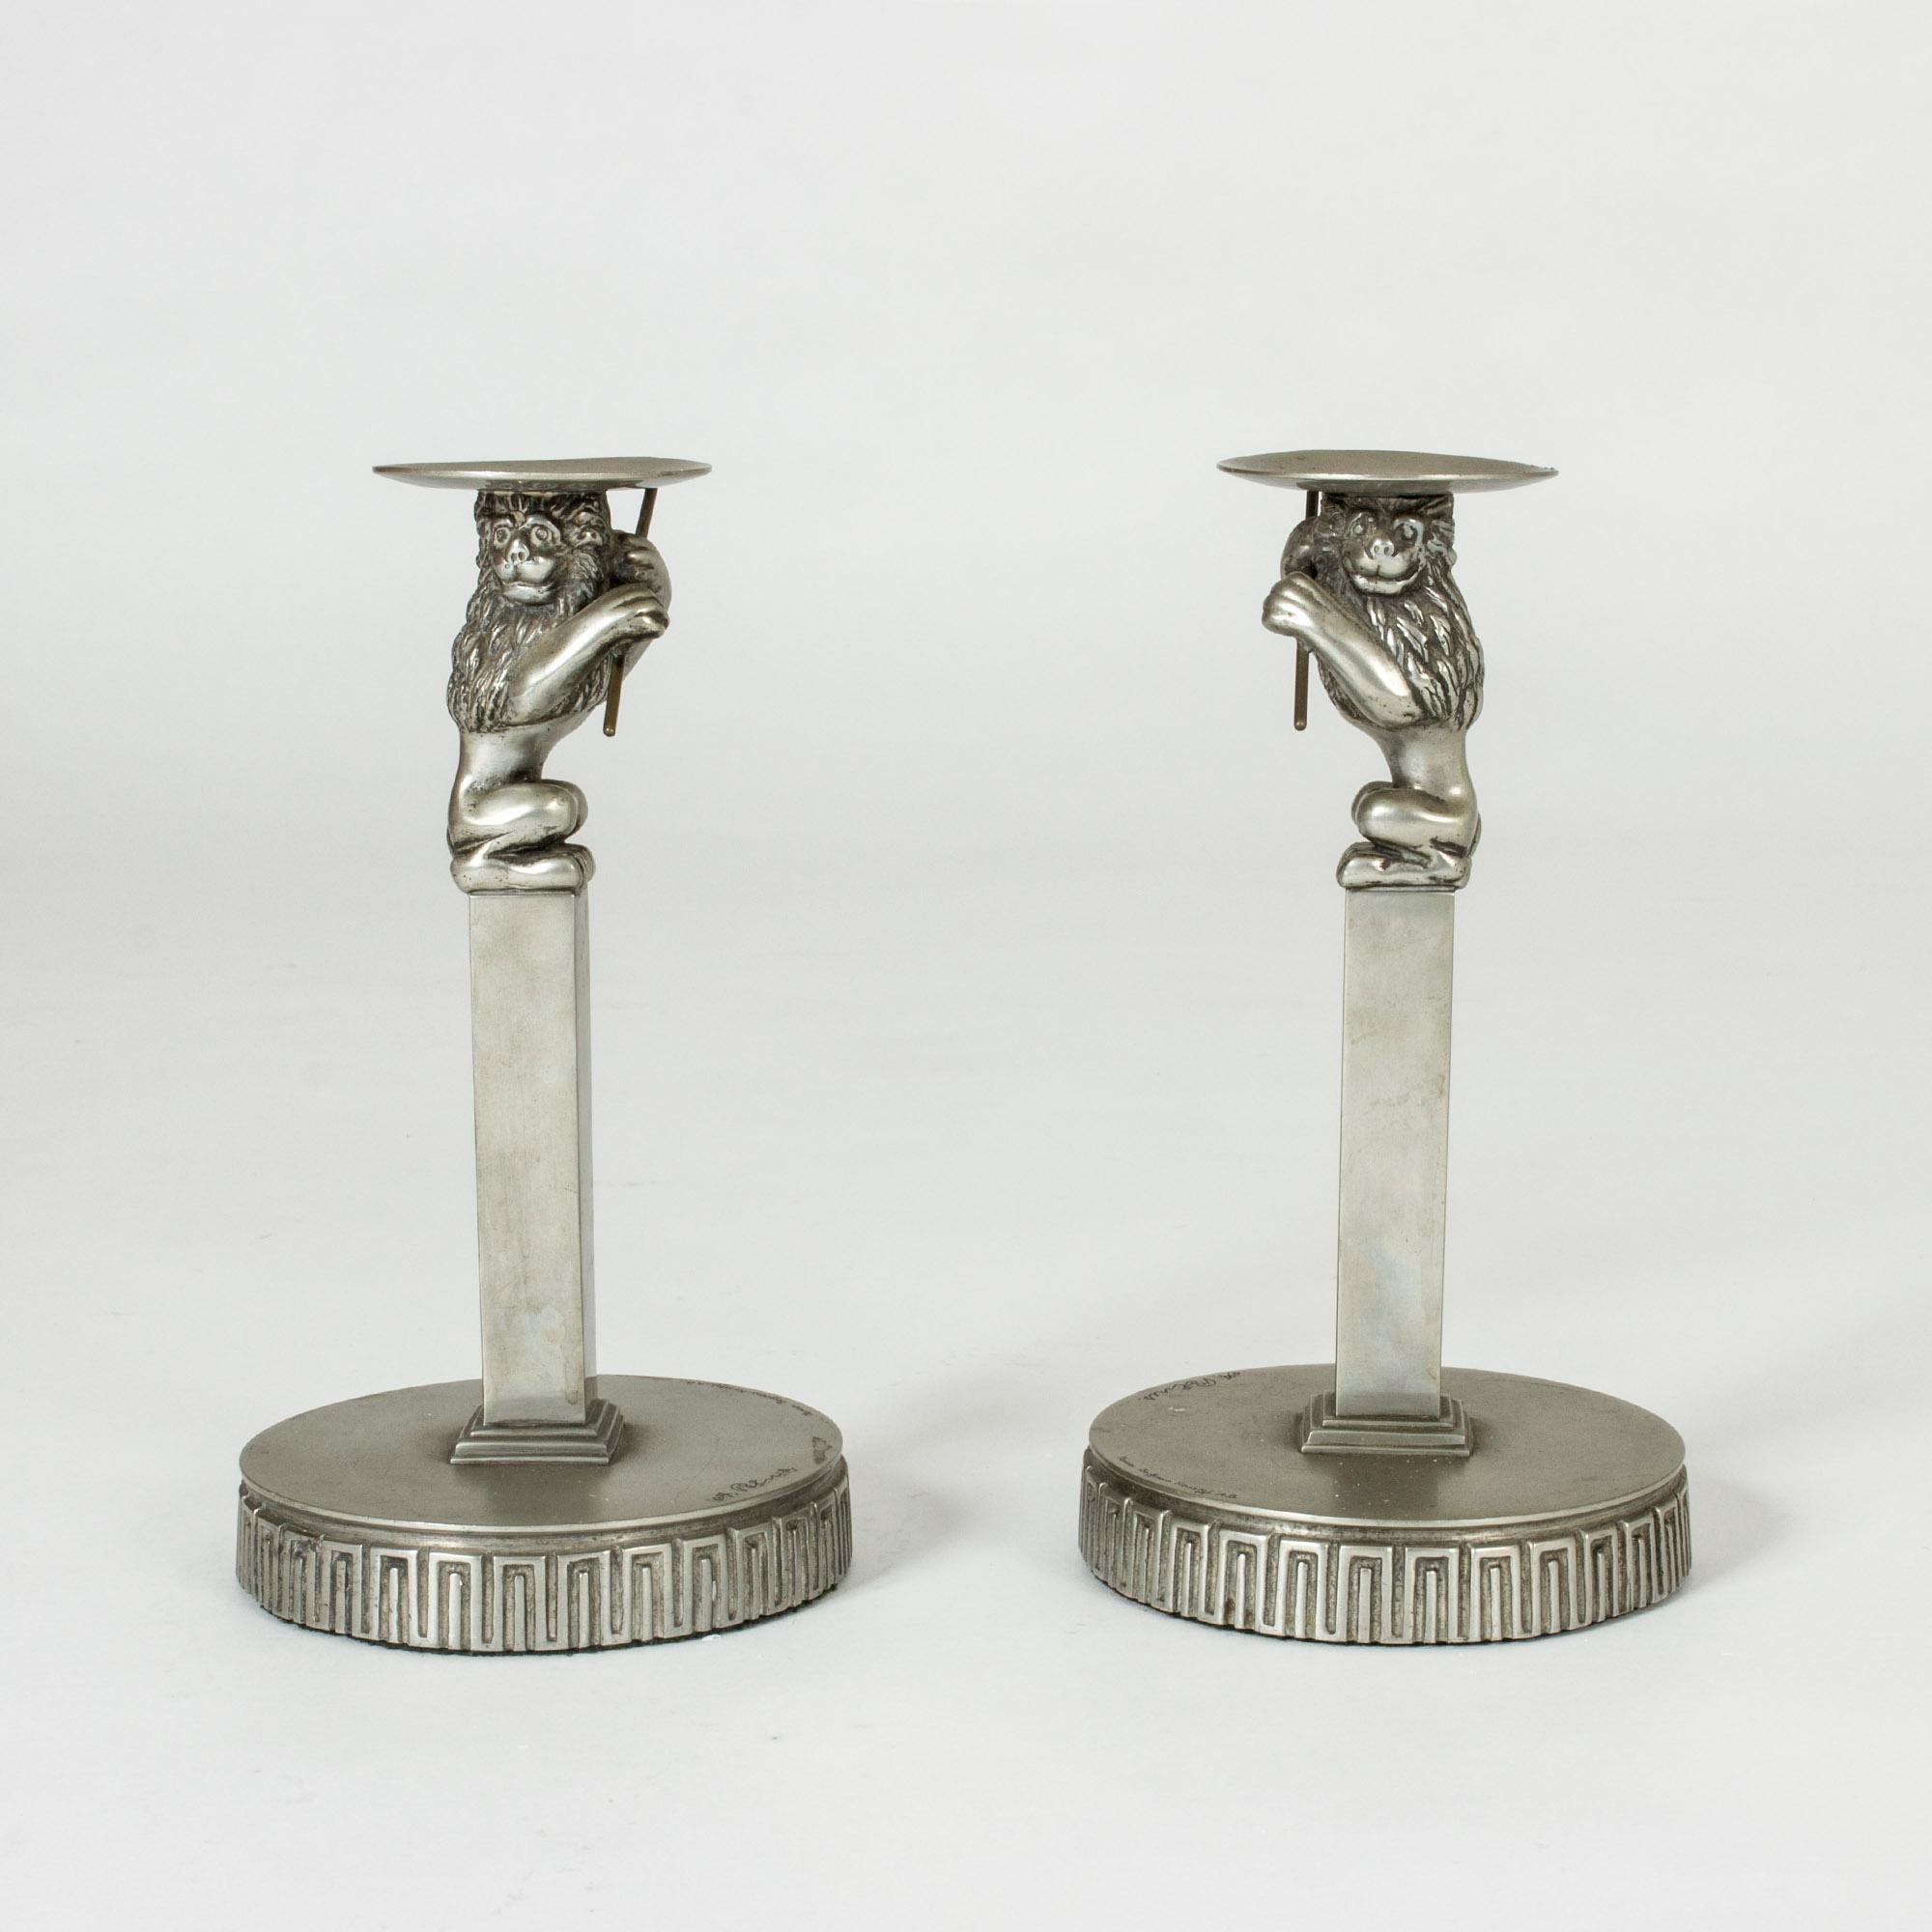 Pair of stunning pewter candlesticks by Anna Petrus, designed in the period 1925-1927. The candleholders sit on the heads of Petrus’ signature lions with expressive faces and flutes in their paws. The wide bases are decorated with a classic meander